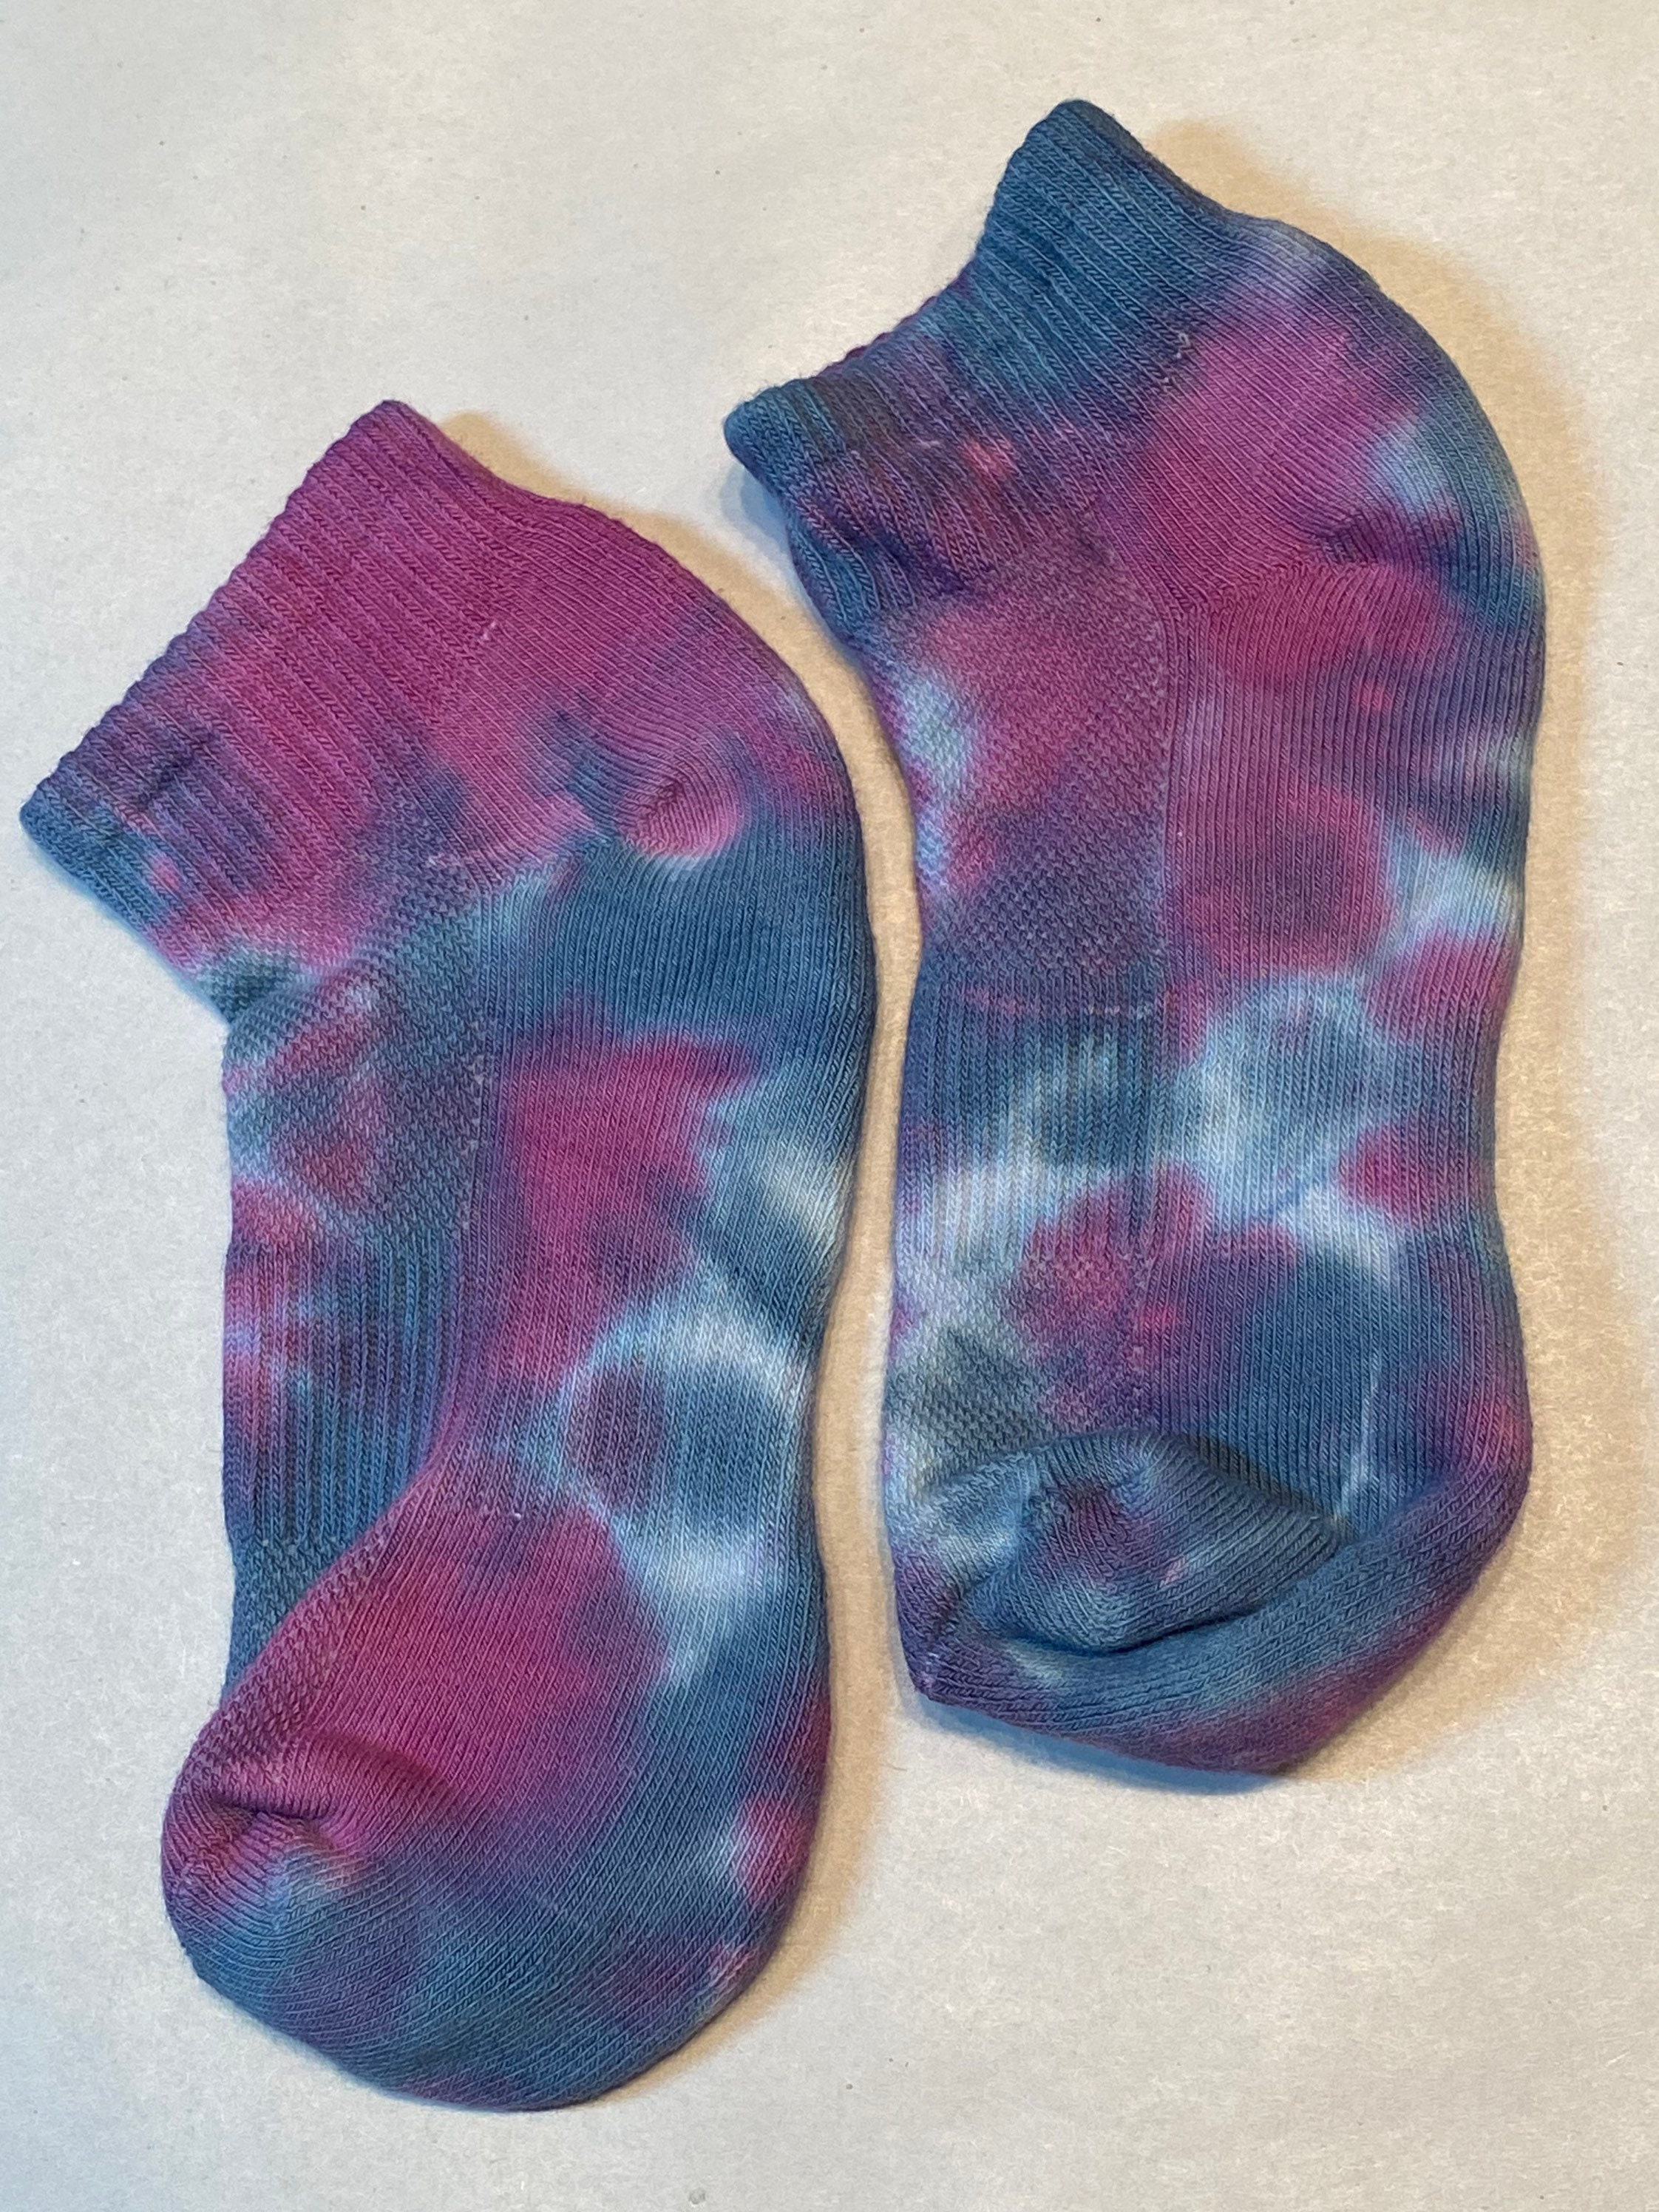 Hand Dyed Tie Dyed Quarter Length Athletic Socks Muted | Etsy